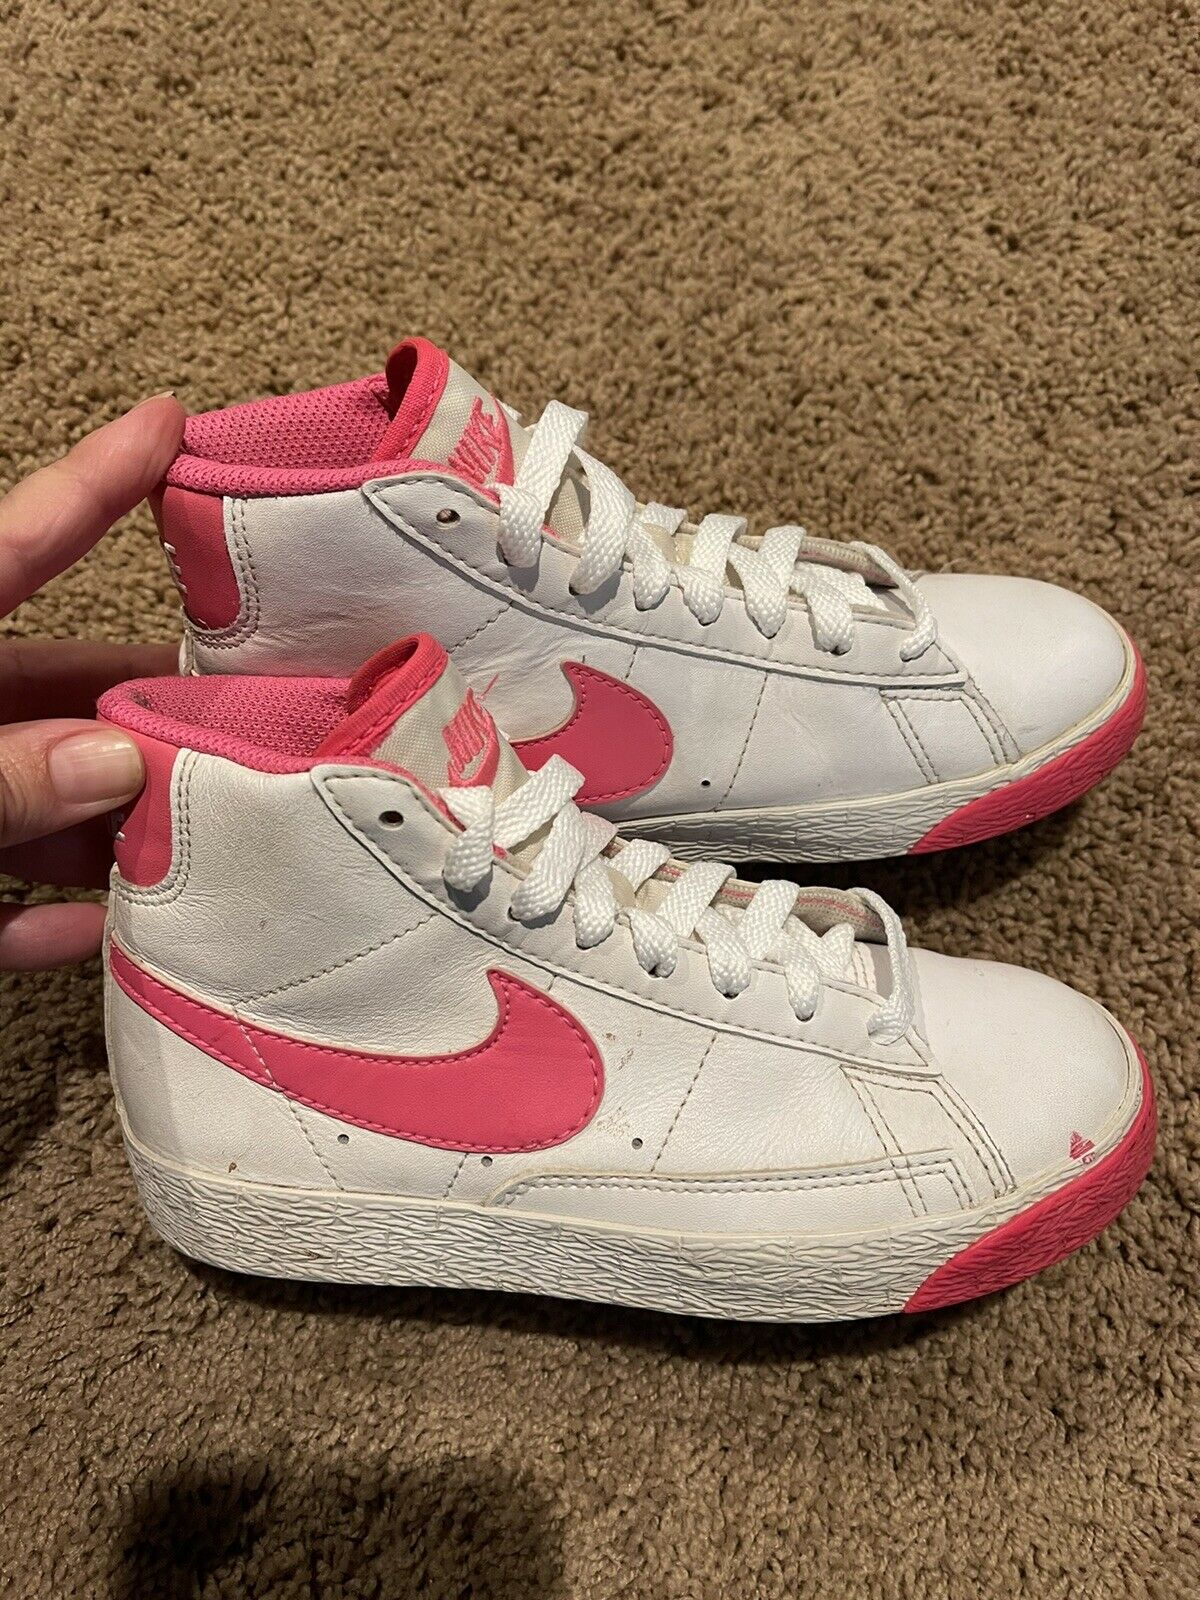 Nike Sweet Classic Sneakers High Tops Shoe Pink White Girls Youth size 13